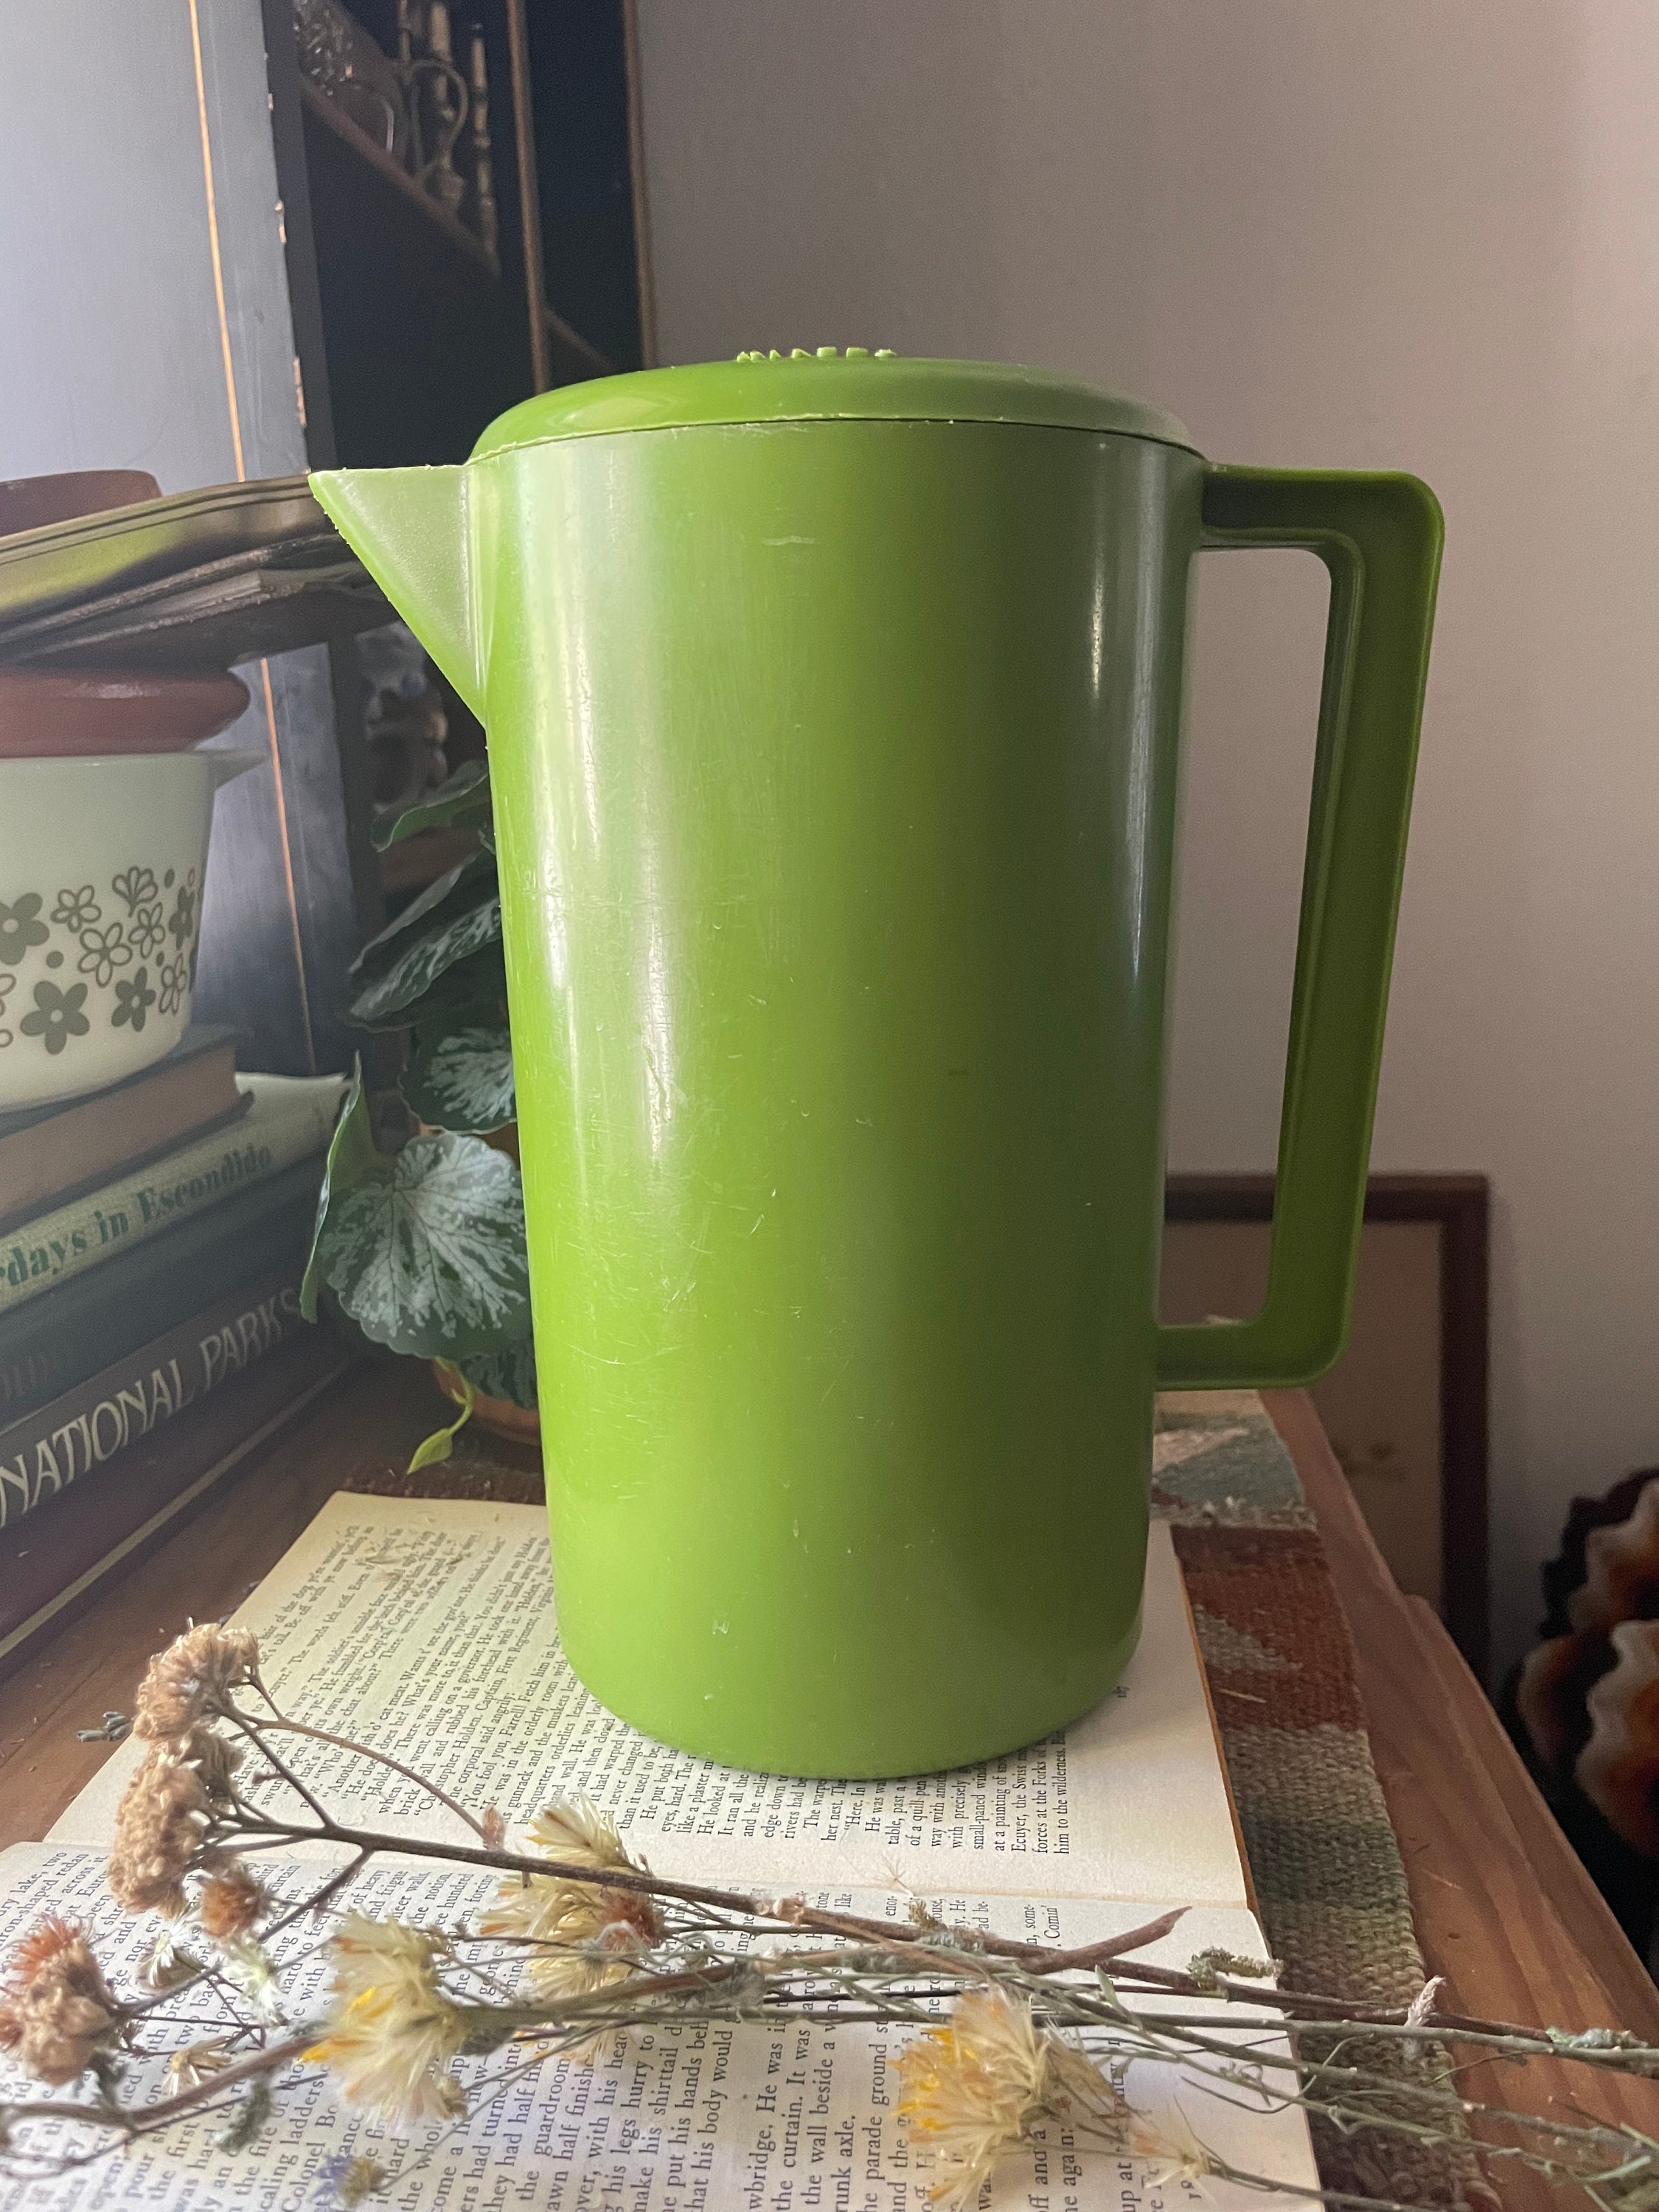 Green Vintage Pitcher, 70s Plastic Pitcher, Tea or Water Pitcher